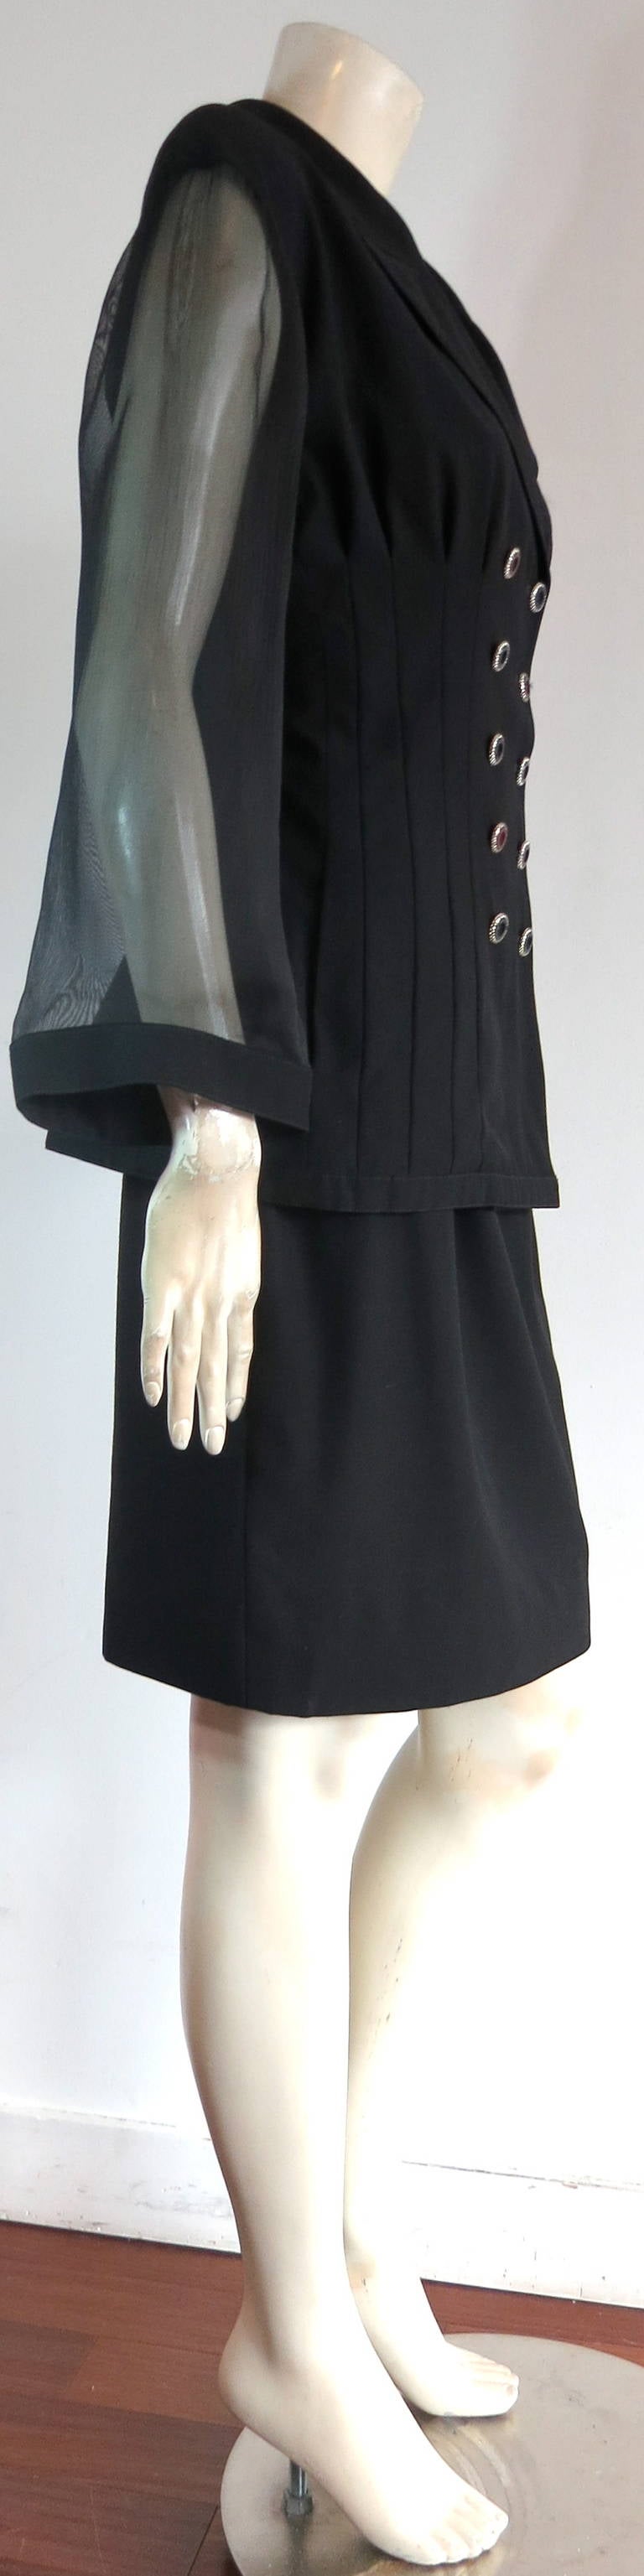 Women's 1980's KARL LAGERFELD Black skirt suit with sheer sleeves For Sale